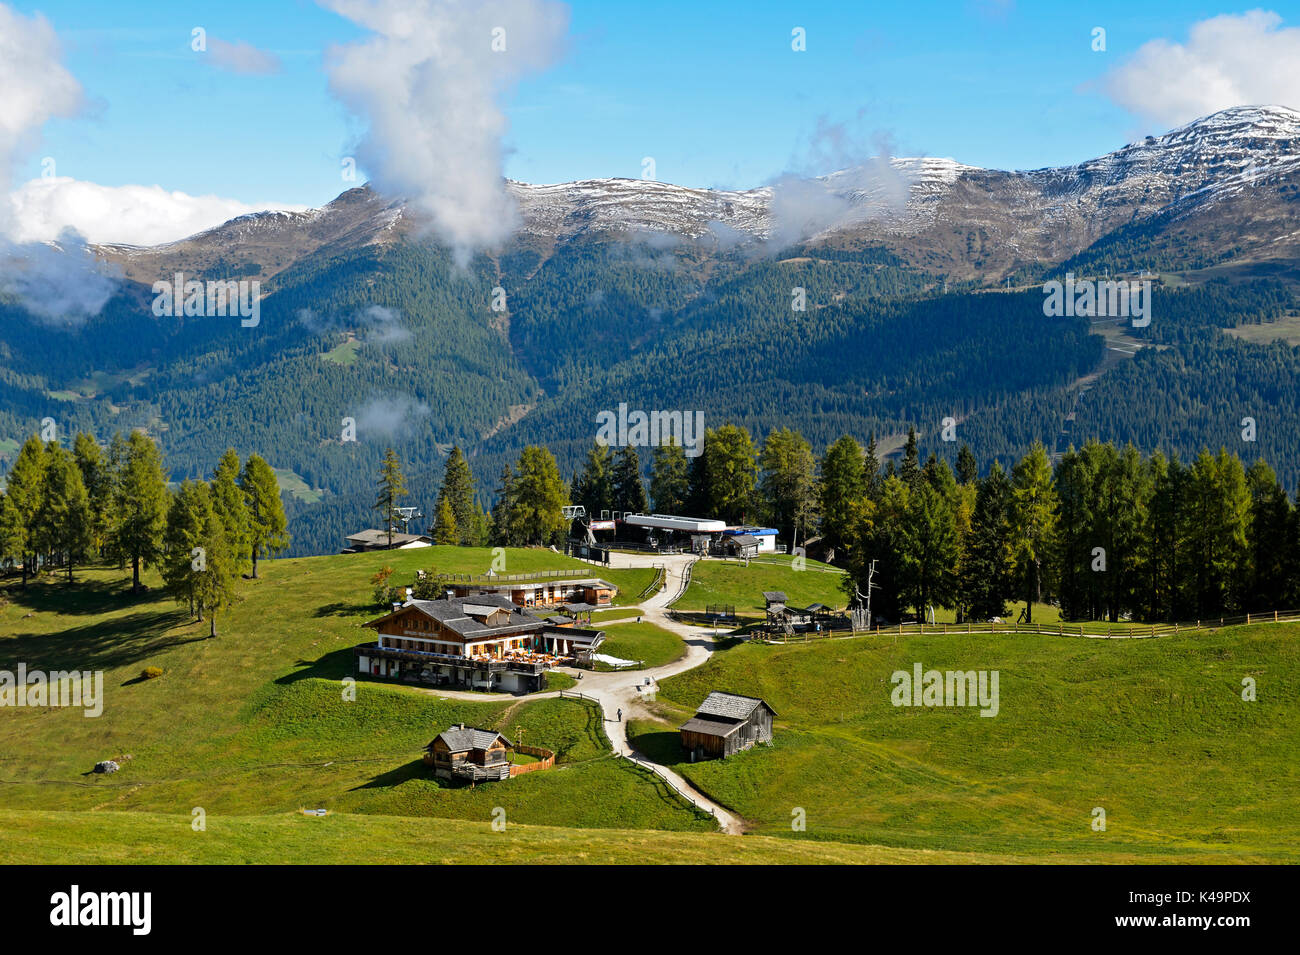 Rifugio Rudi Hutte And Upper Station Of The Croda Rossa Cable Car, Sesto, Dolomites, South Tyrol, Italy Stock Photo